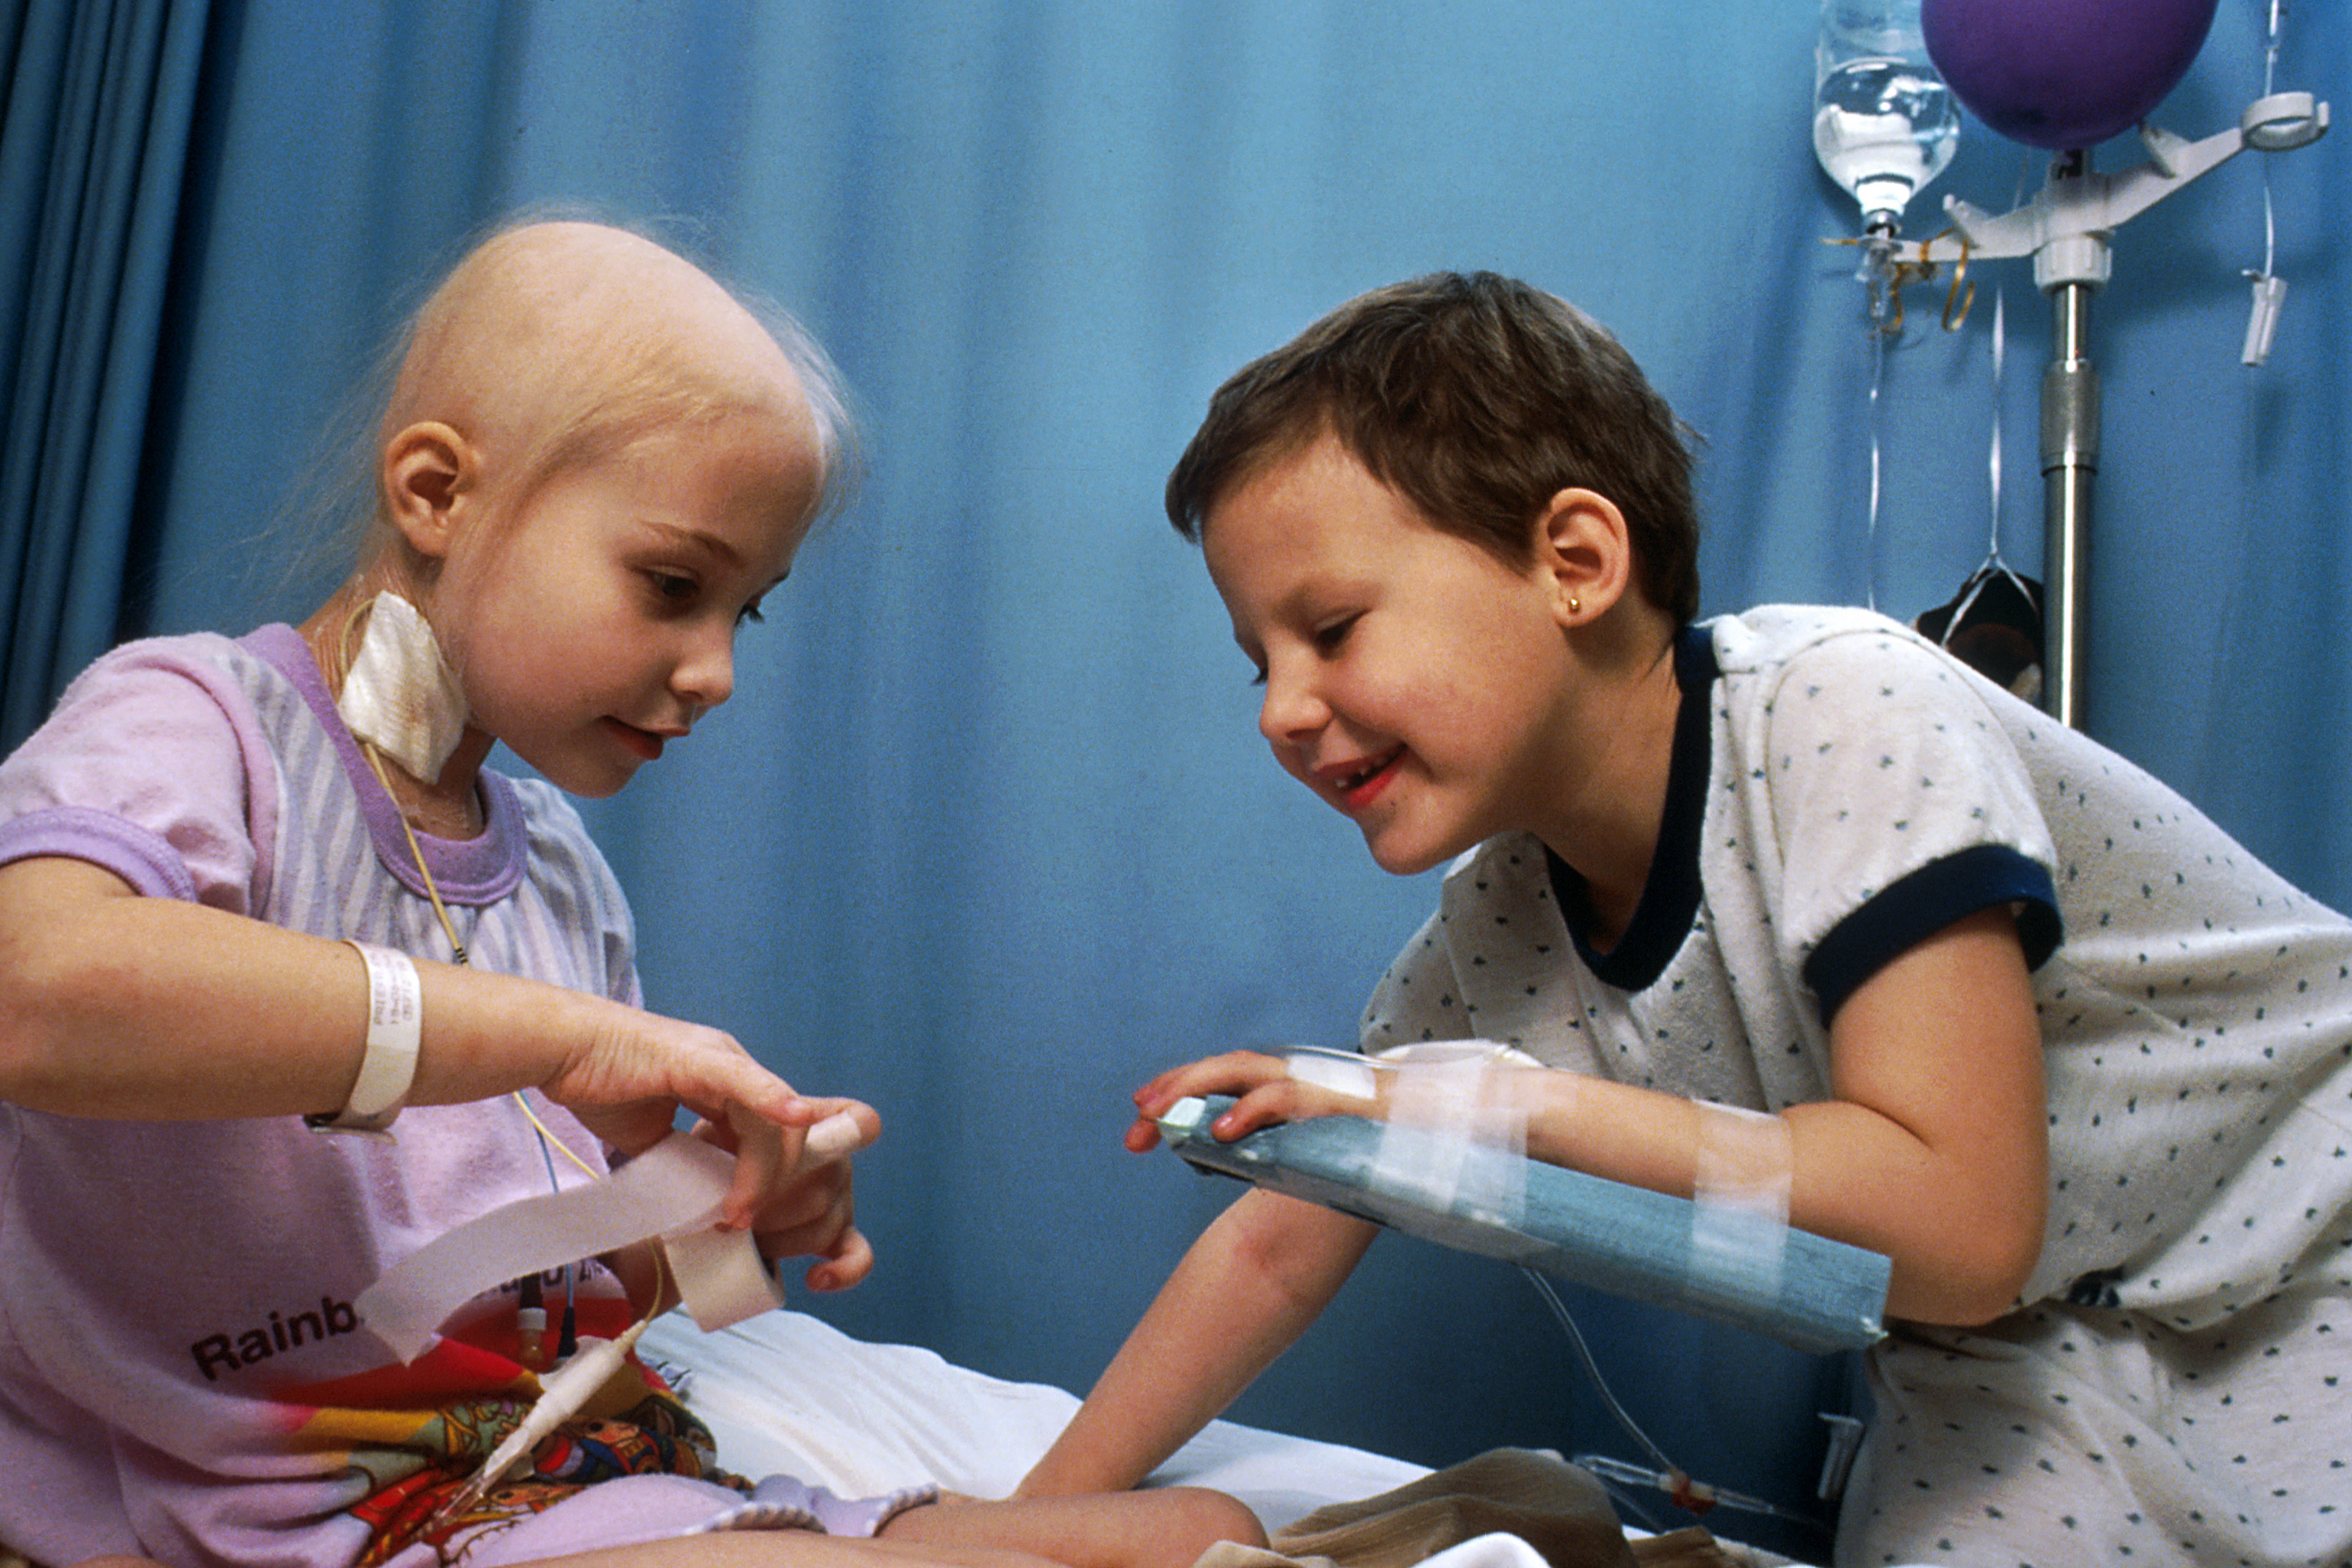 Two acute lymphocytic leukemia patients who are receiving chemotherapy; they are demonstrating some of the procedures used with chemotherapy